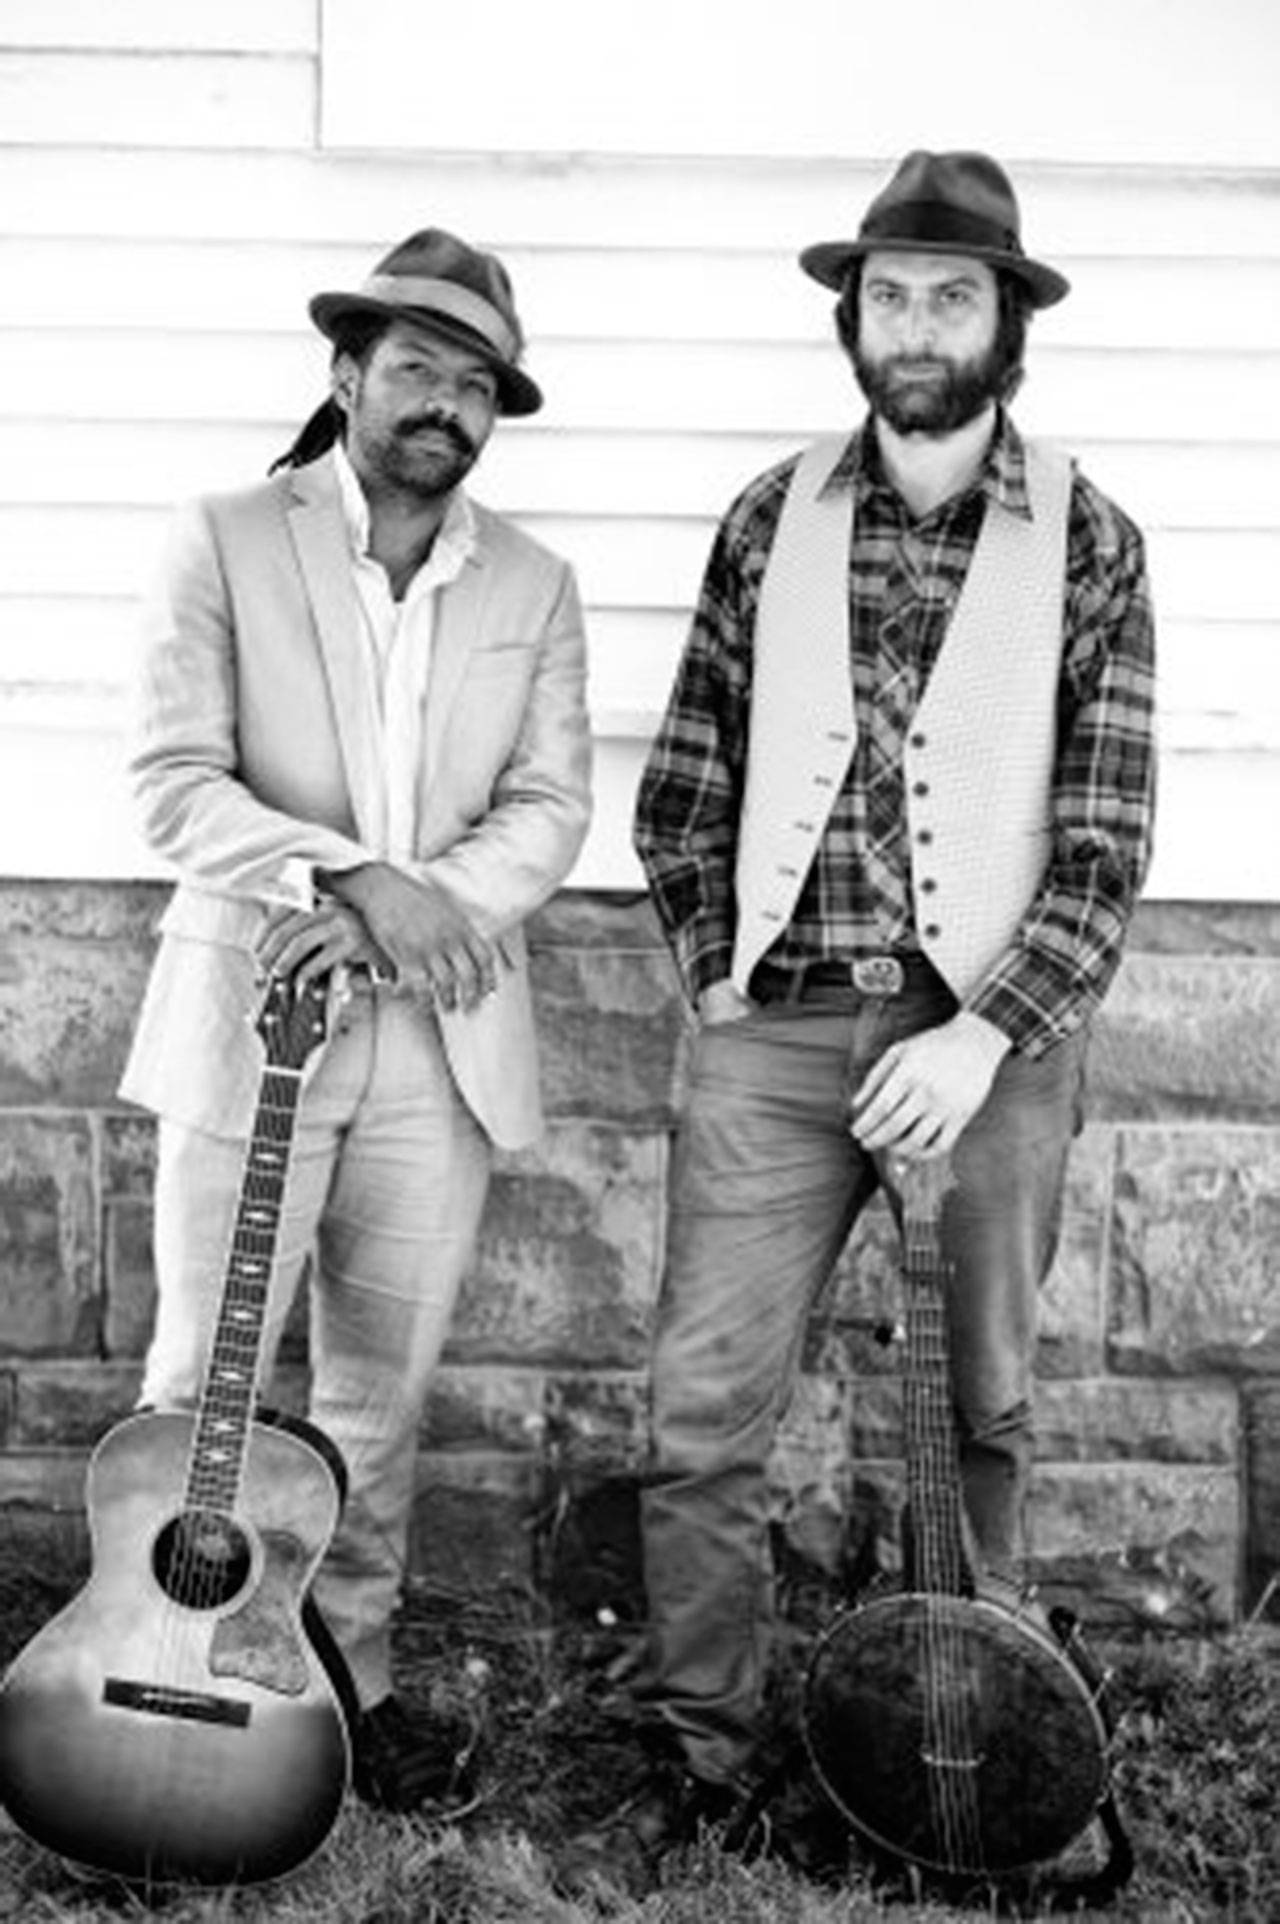 Photo courtesy of the Treehouse Café | Seattle songsters Ben Hunter and Joe Seamons will perform a free concert at the Treehouse Café from 8 to 10:30 p.m. Friday, Jan. 31.